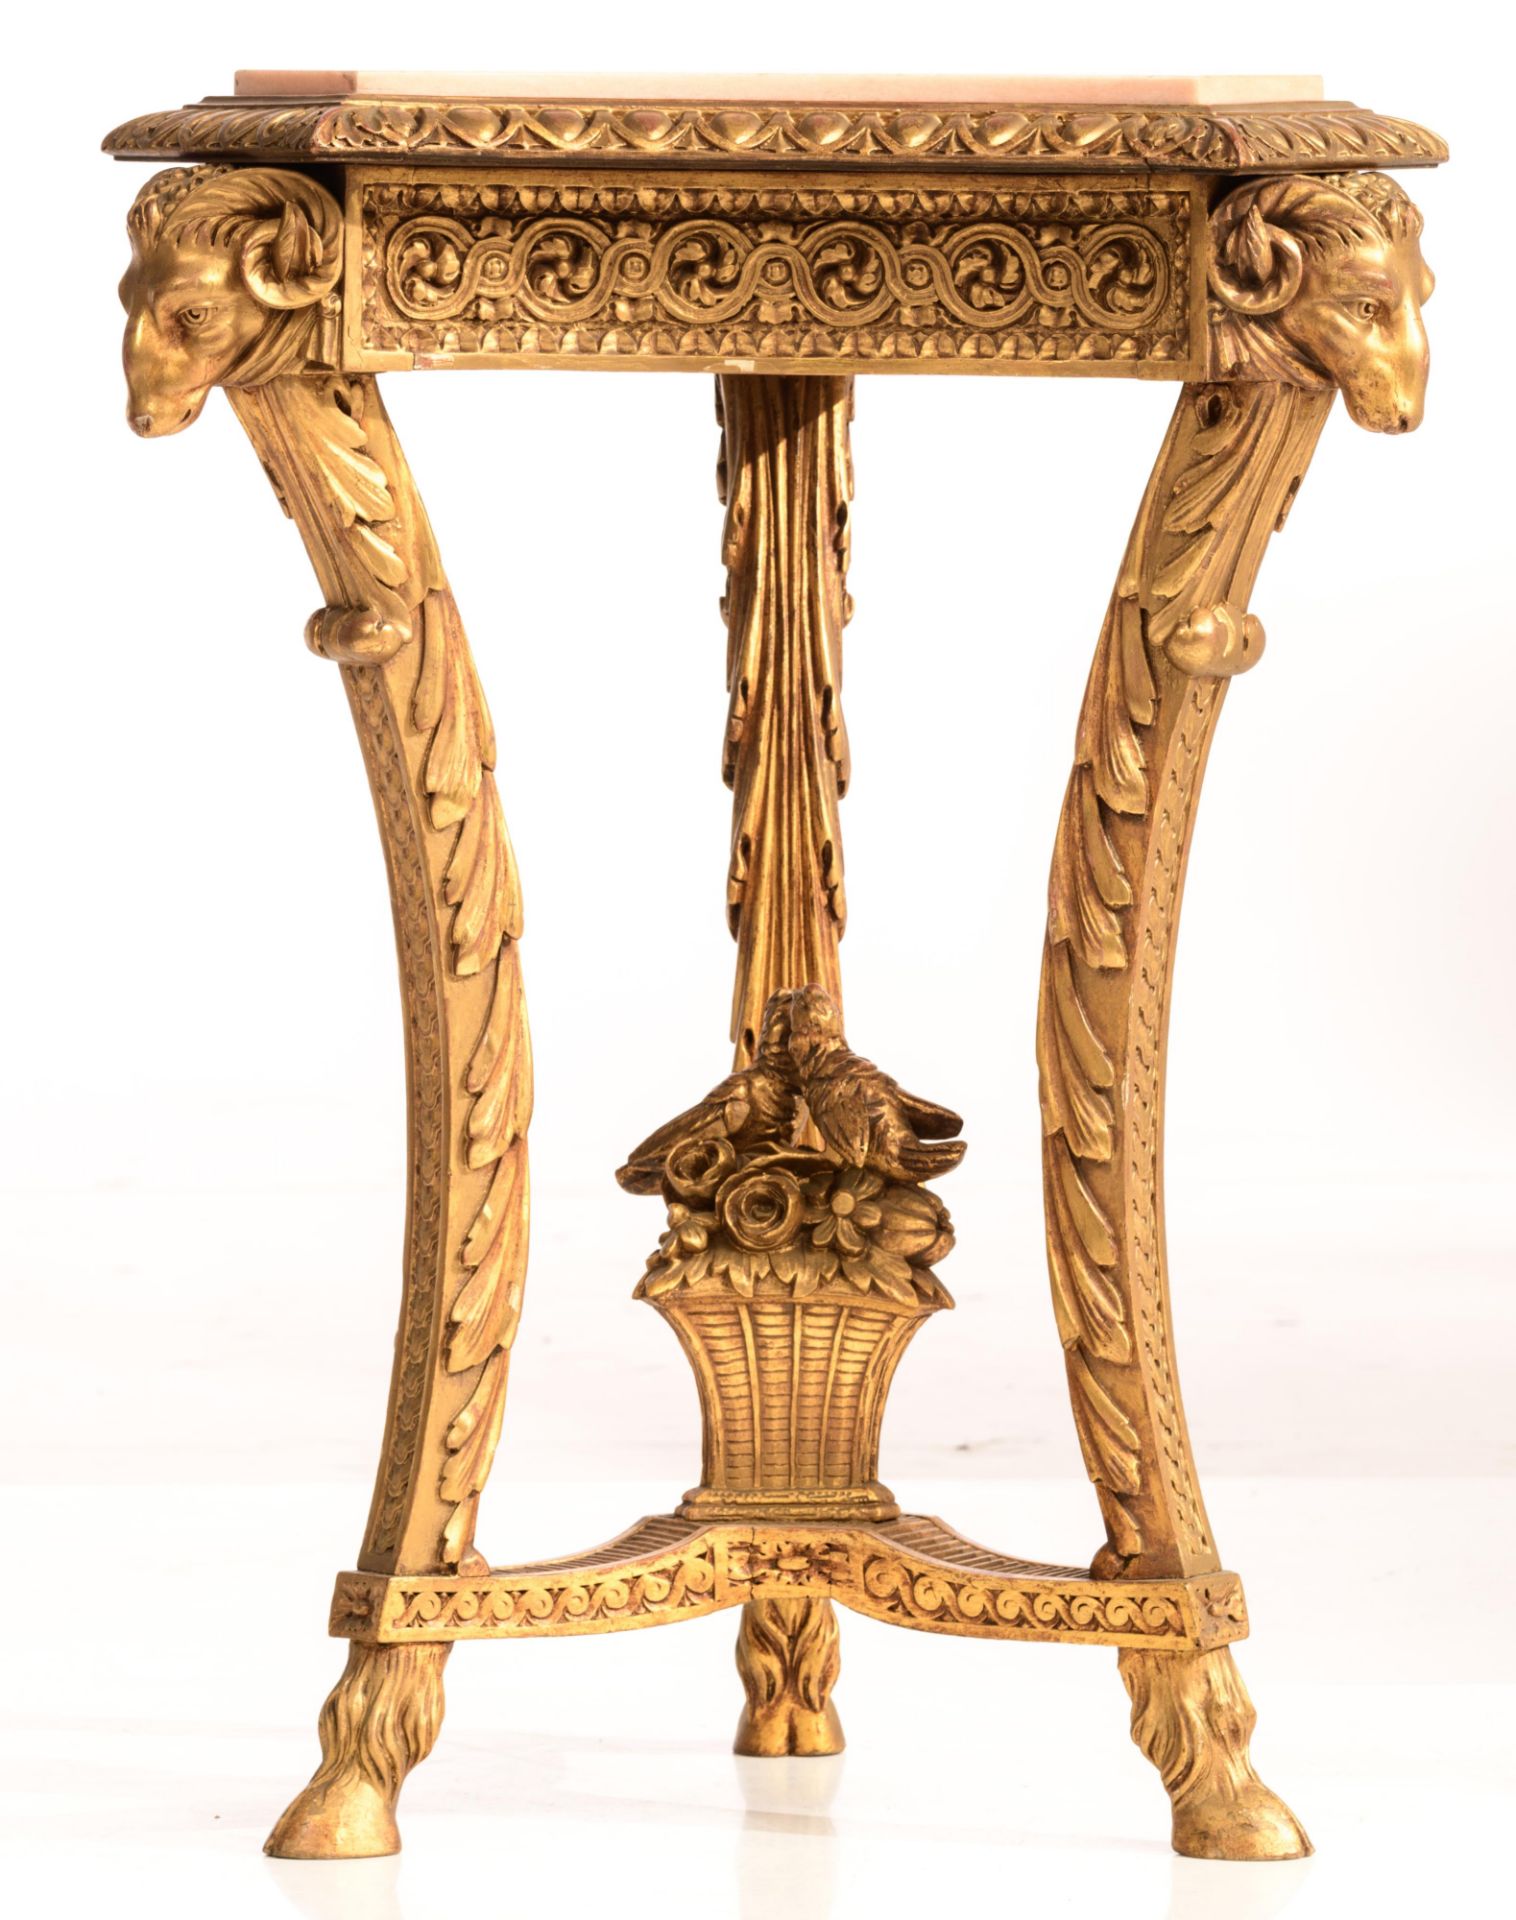 A Louis XVI style carved and giltwood gueridon, H 75 - W 57 - D 53 cm - Image 4 of 9